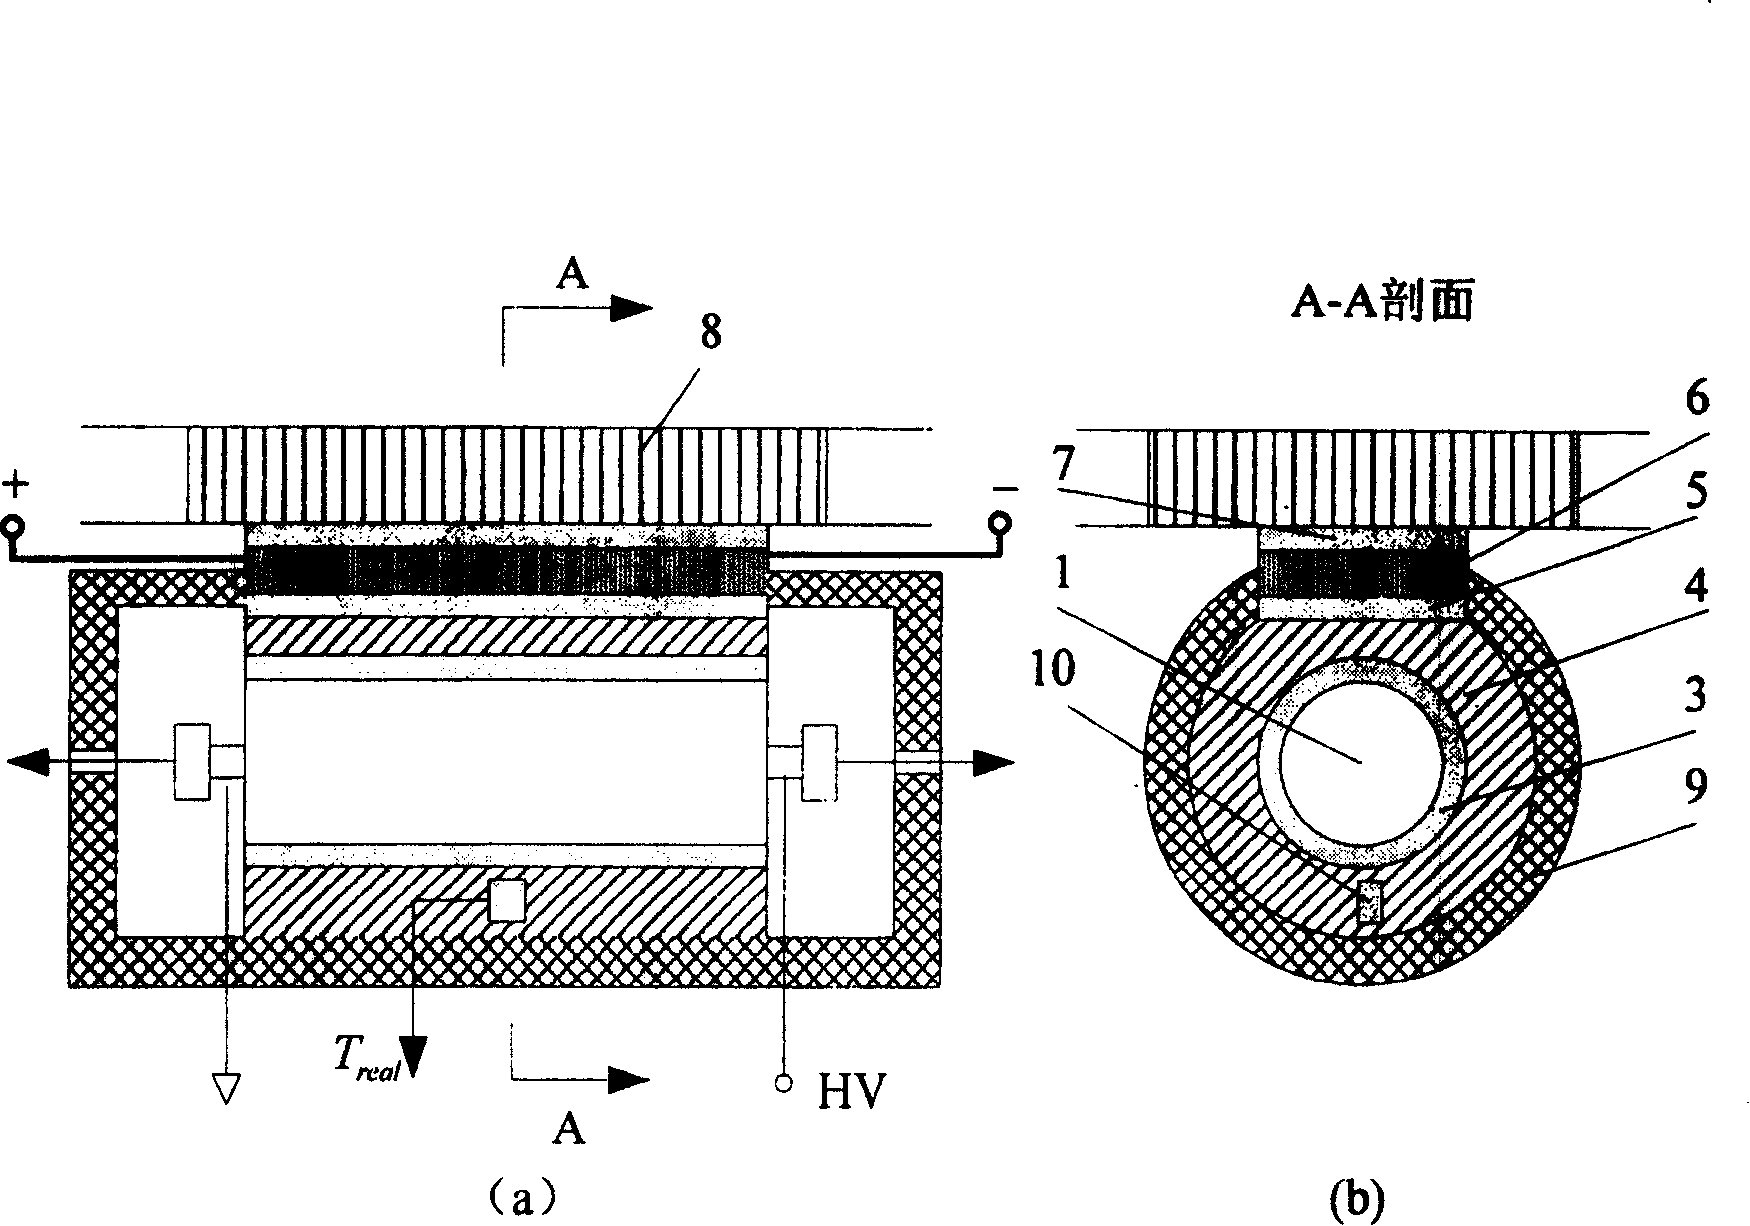 Method and device for stabilizing double-longitudinal mold laser frequency based on thermoelectric cryostat